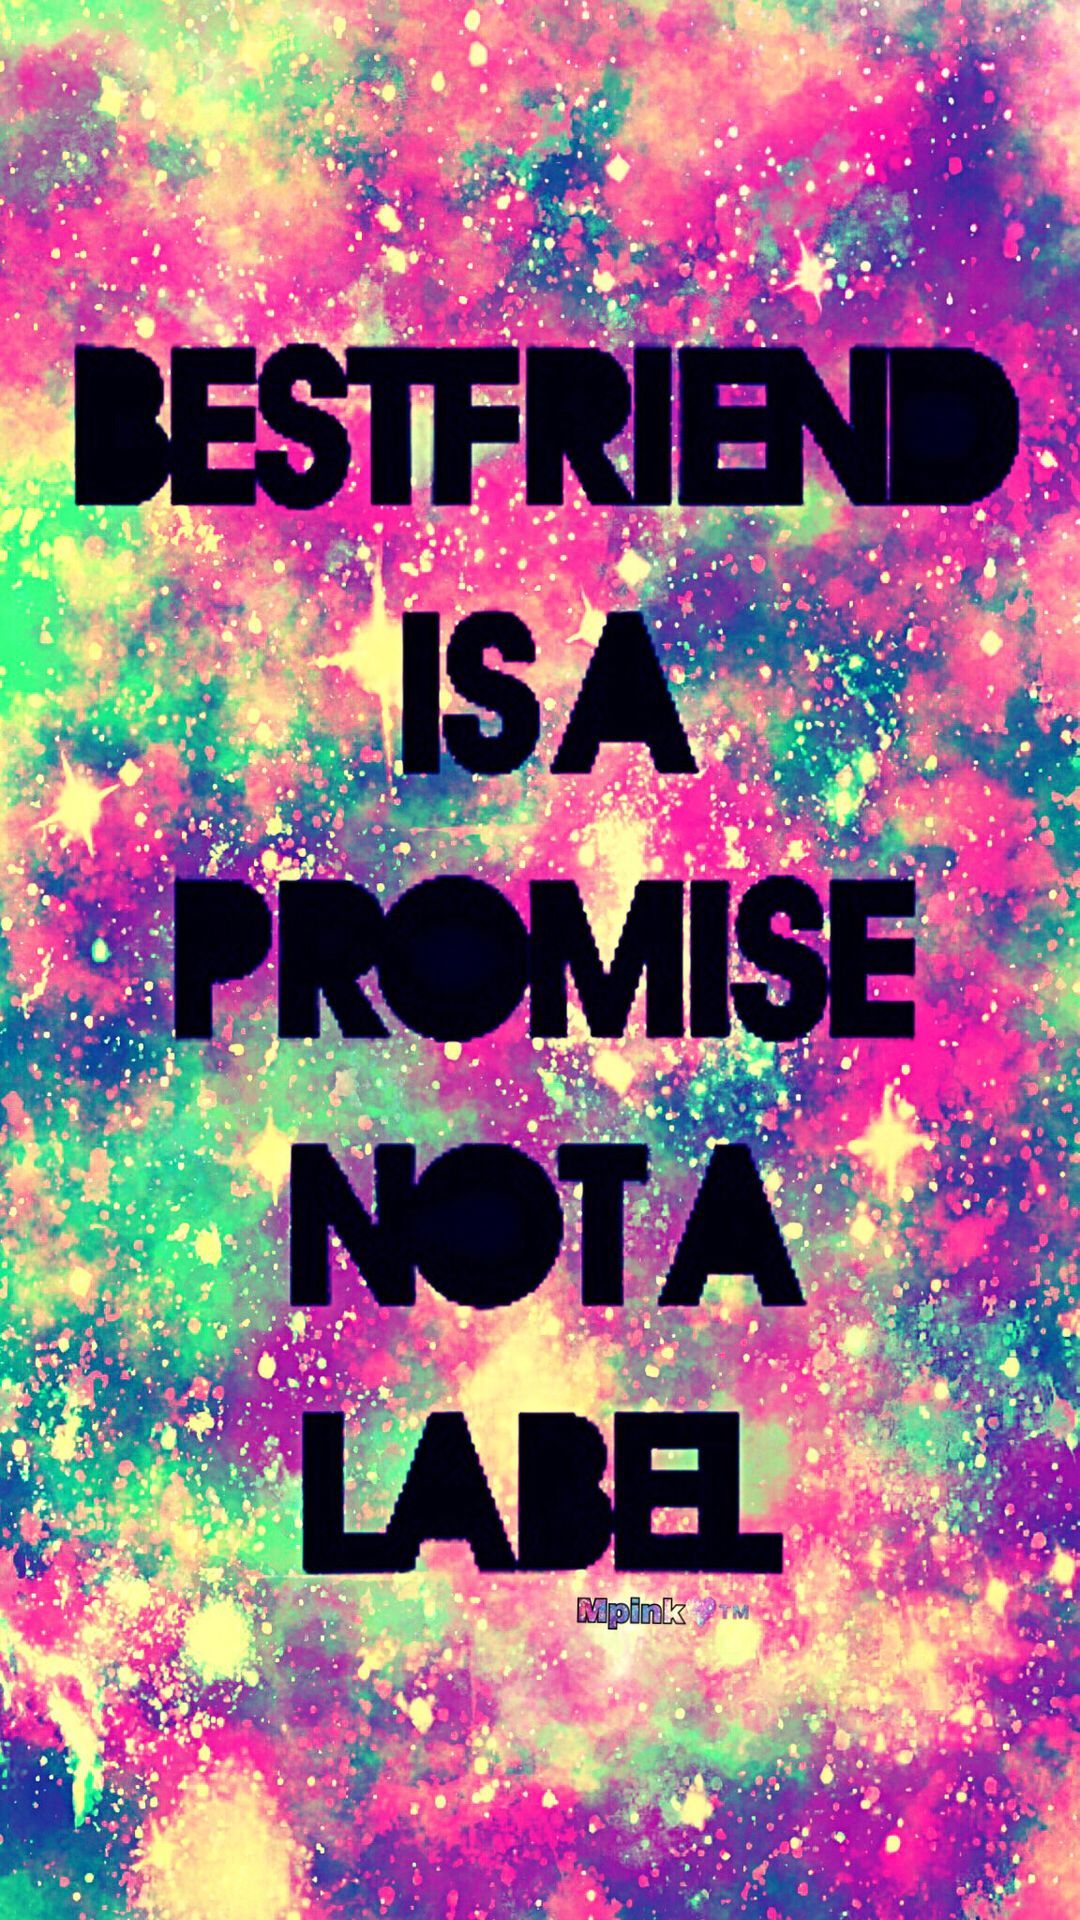 Best Friend Galaxy Wallpaper #androidwallpaper #iphonewallpaper #wallpaper #galaxy #sparkle #glitter #loc. Cute bff quotes, Friends forever quotes, Friends quotes